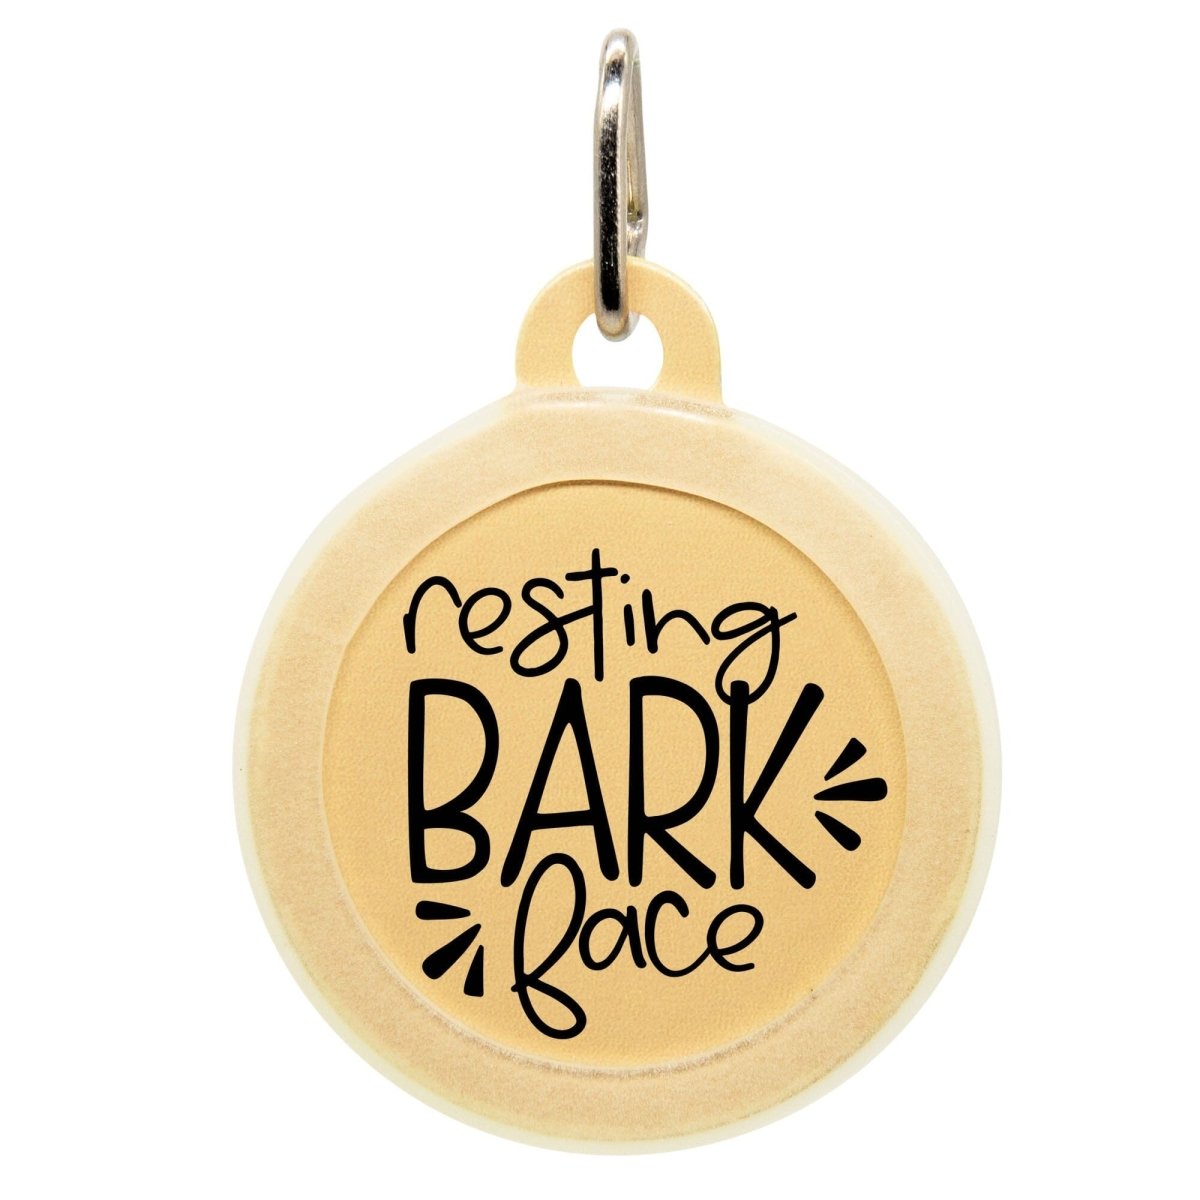 Resting Bark Face Name Tag - Oh My Paw'd